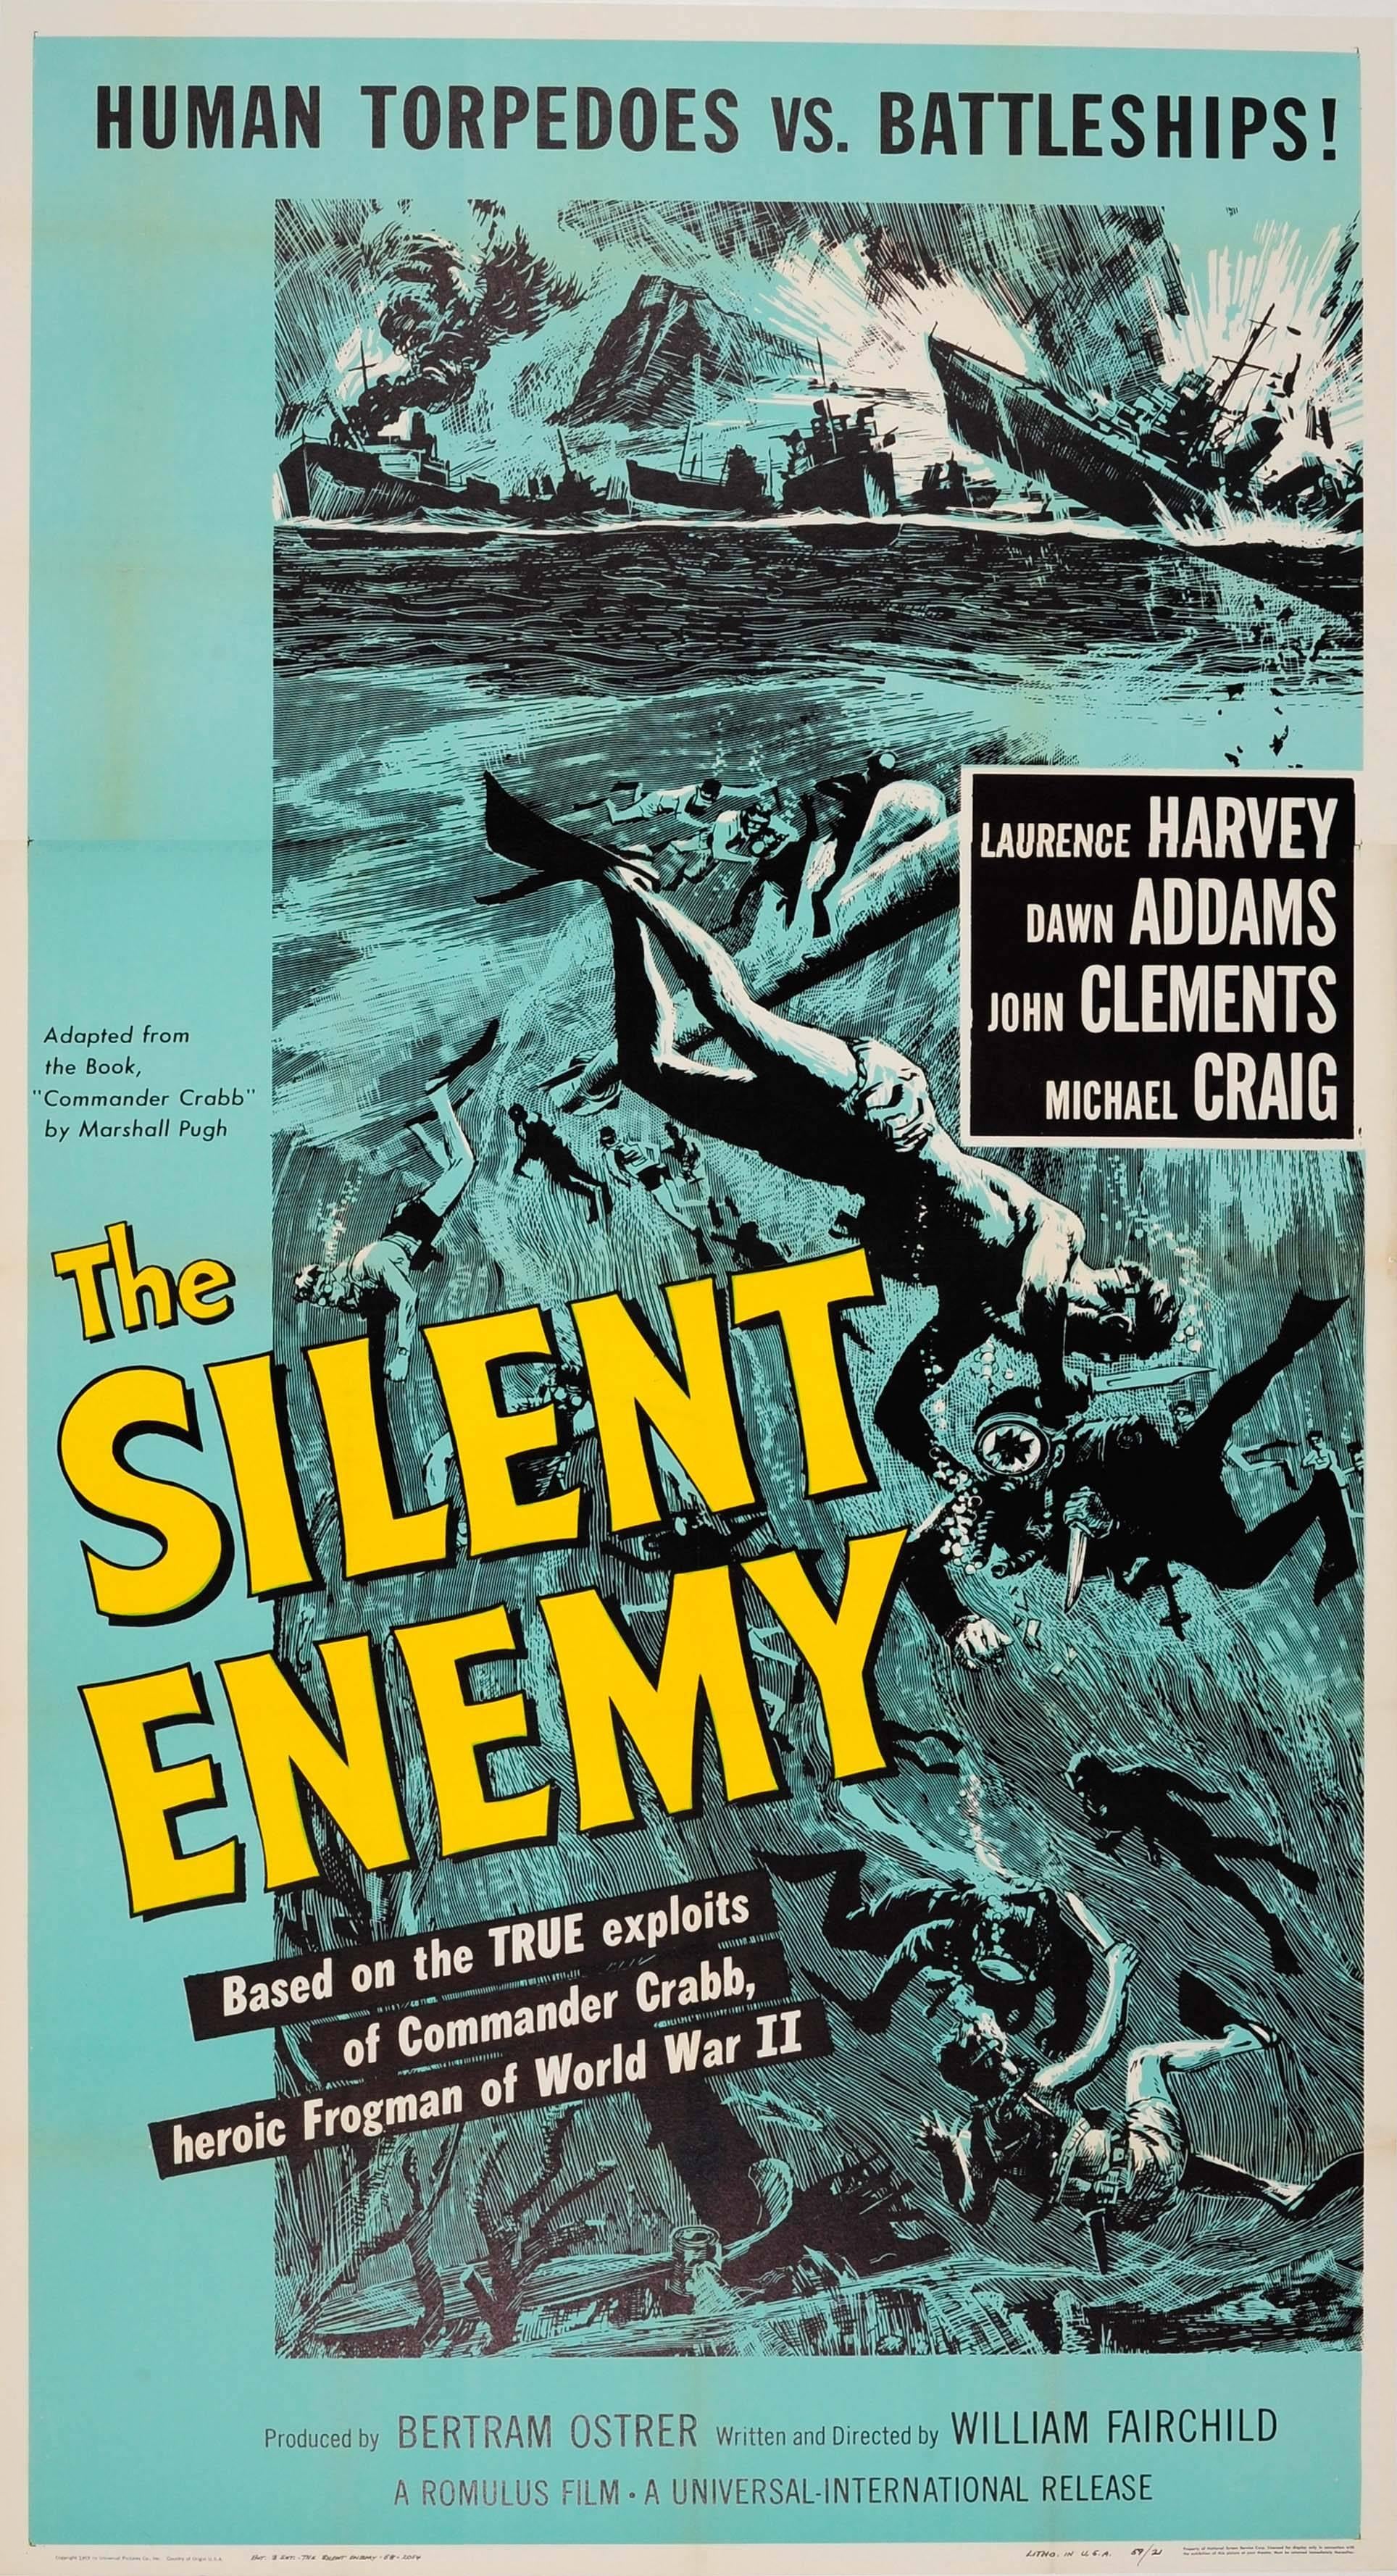 Unknown Print - Original Movie Poster For The Silent Enemy Based On WWII Frogman Commander Crabb